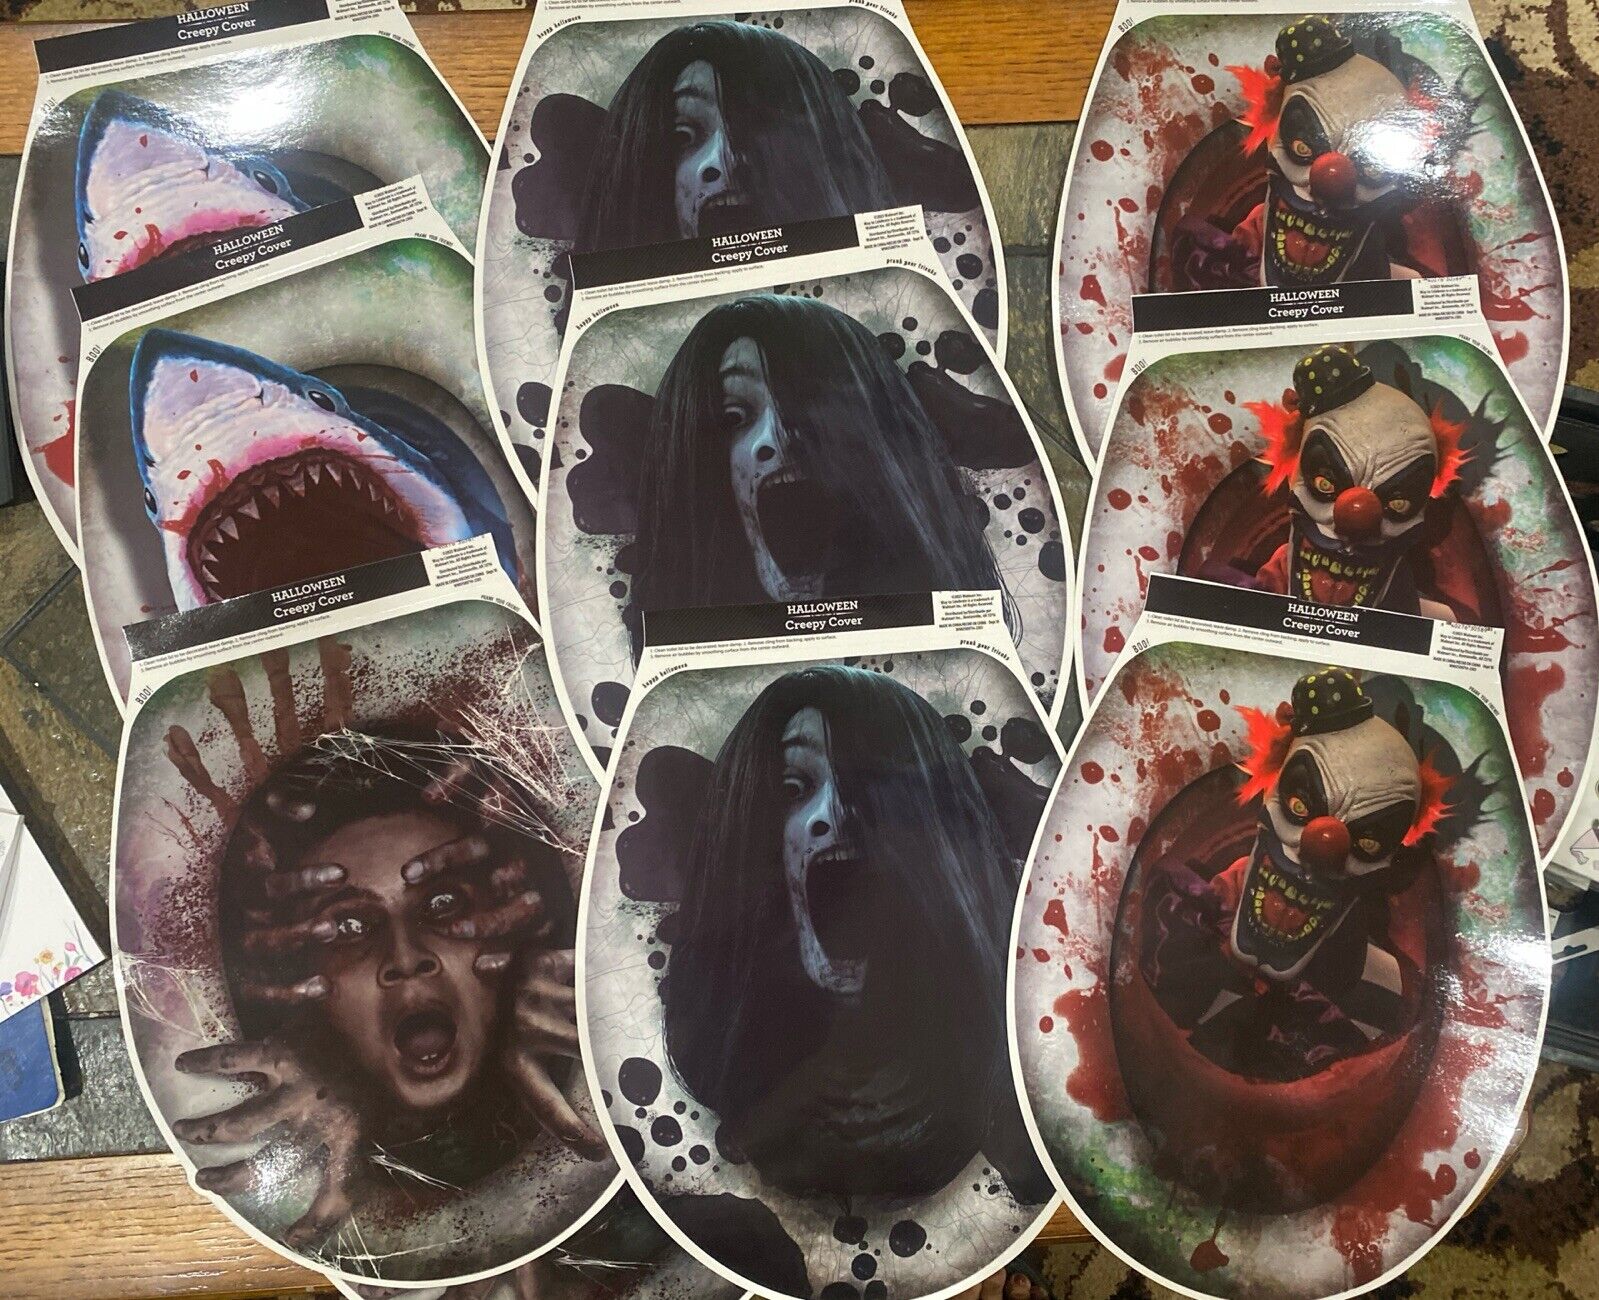 10 Creepy Covers 4 Designs TOILET TOPPER Cling Decal Bathroom Halloween Decor